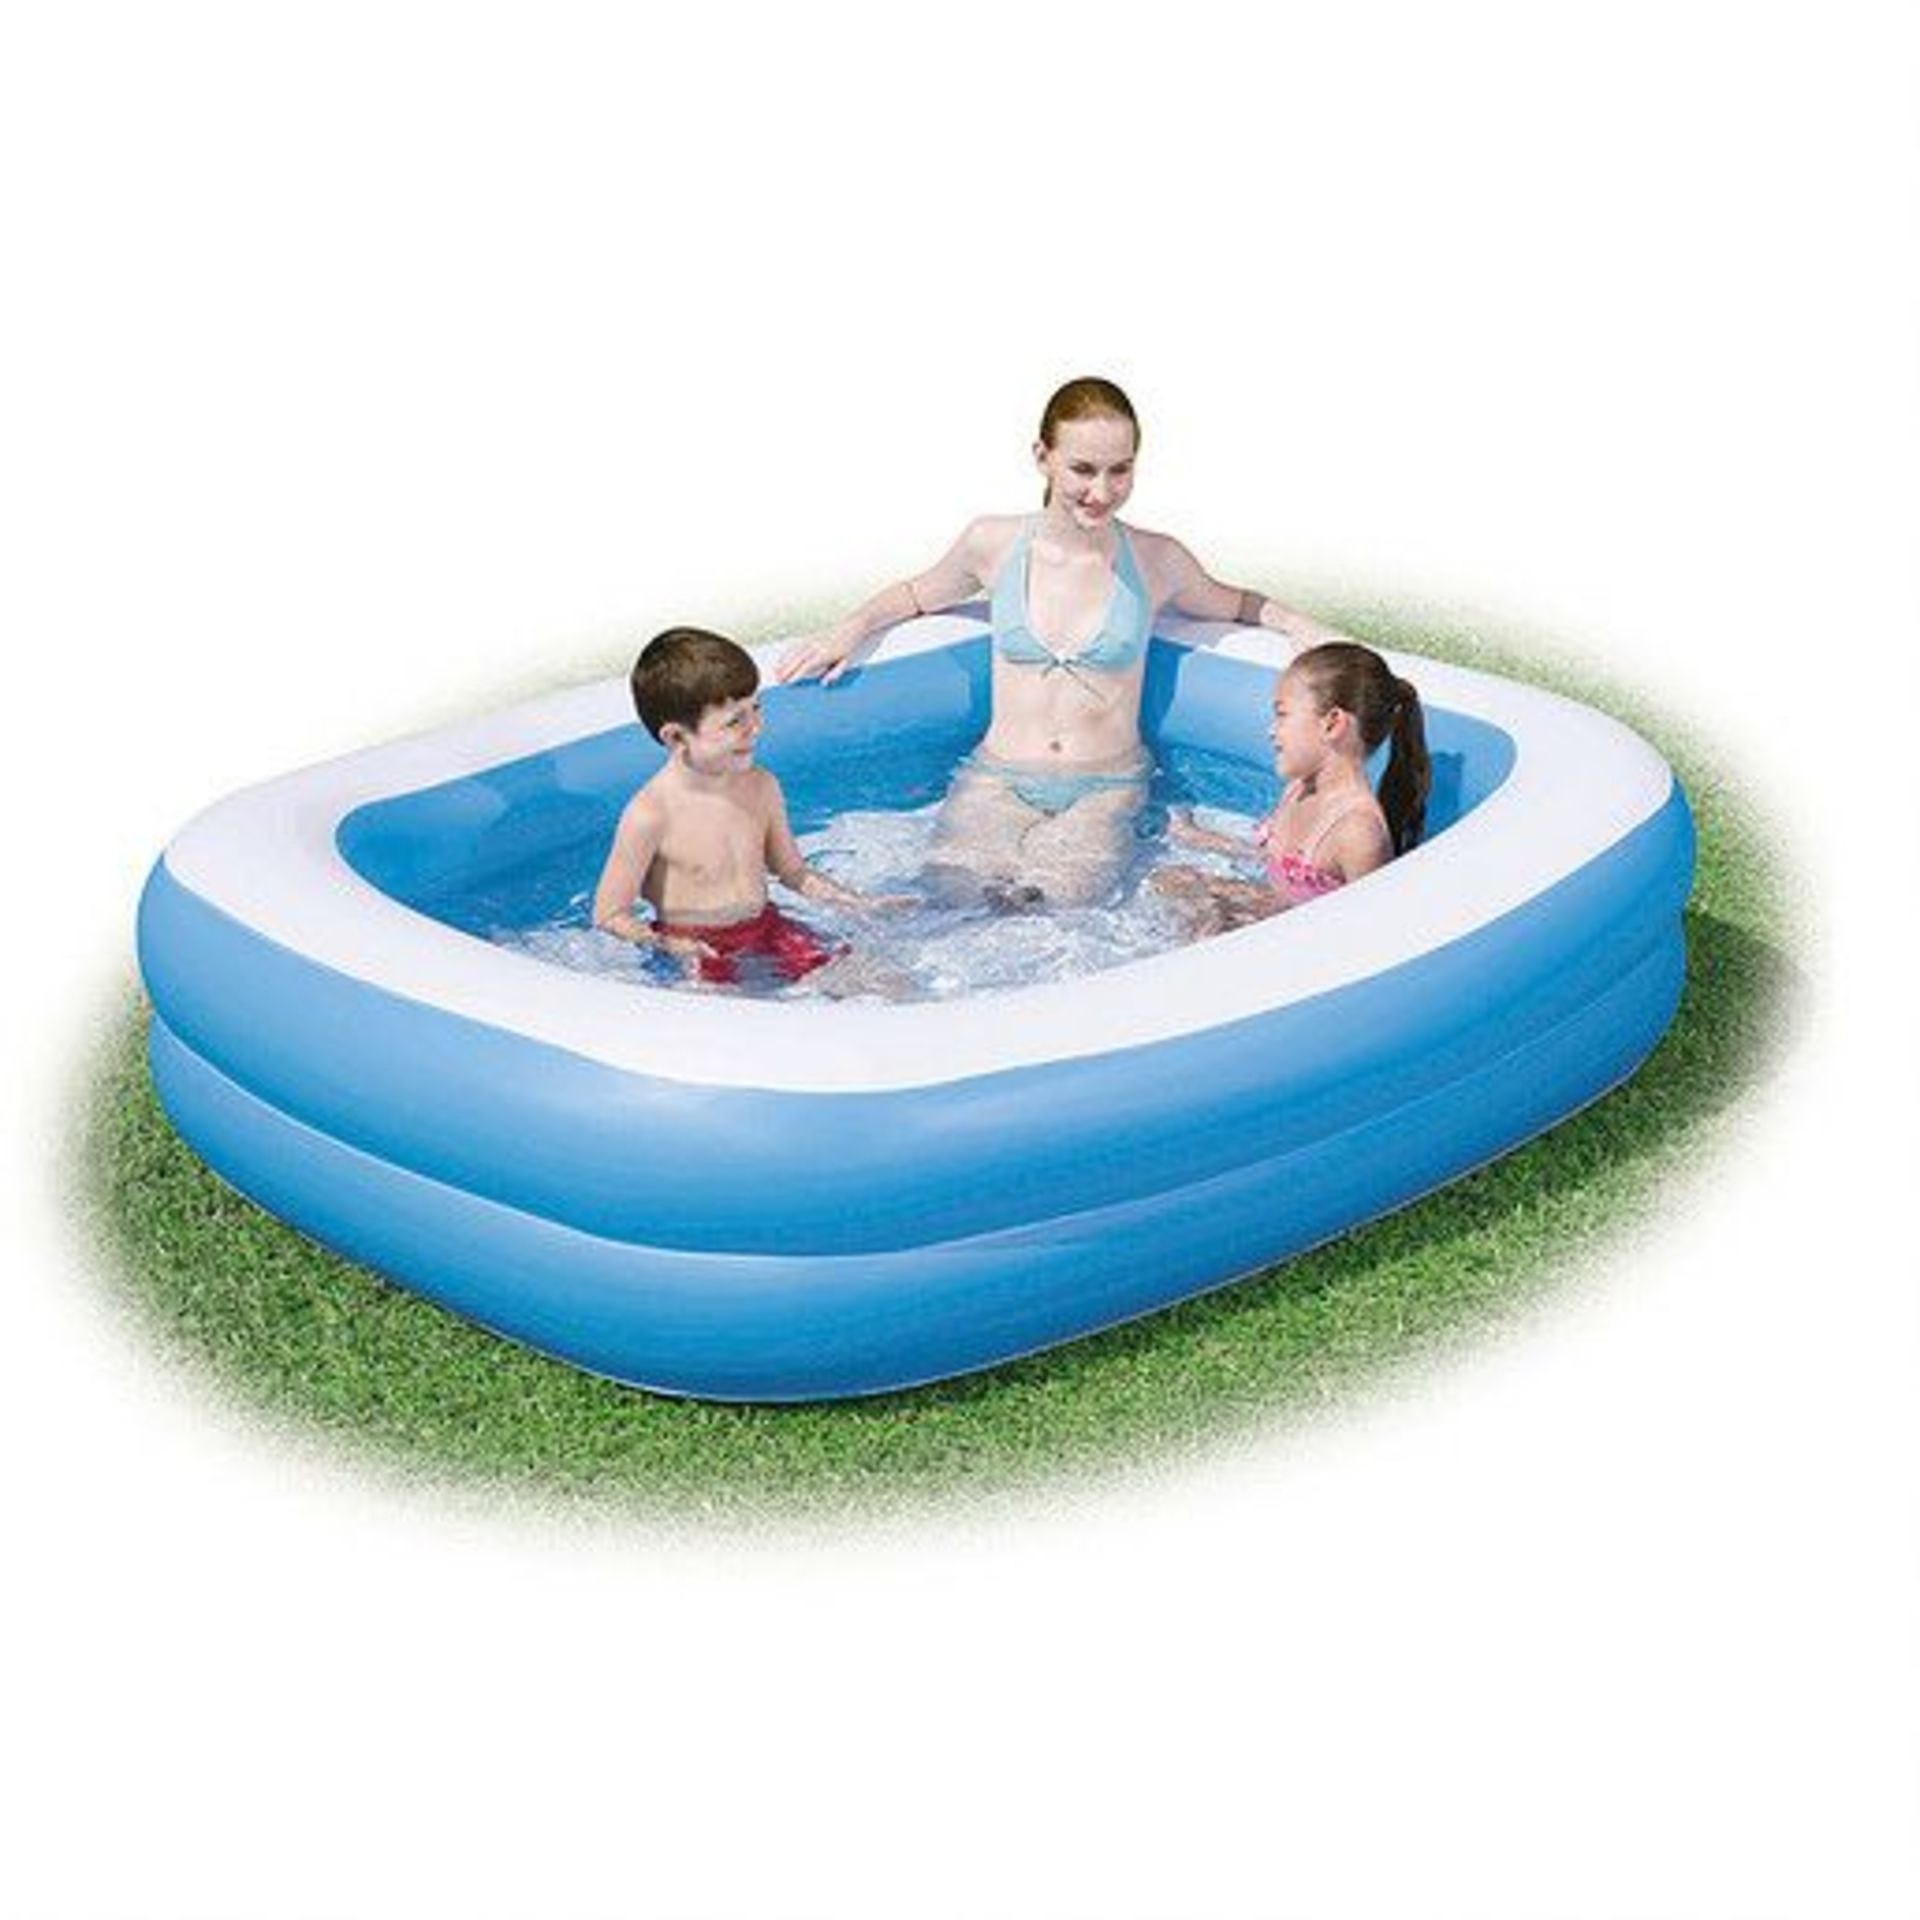 V Brand New Large Family Blow-Up Pool (2.01m x 1.5m x 51cm) Tesco Direct Price £19.99 X 2 YOUR BID